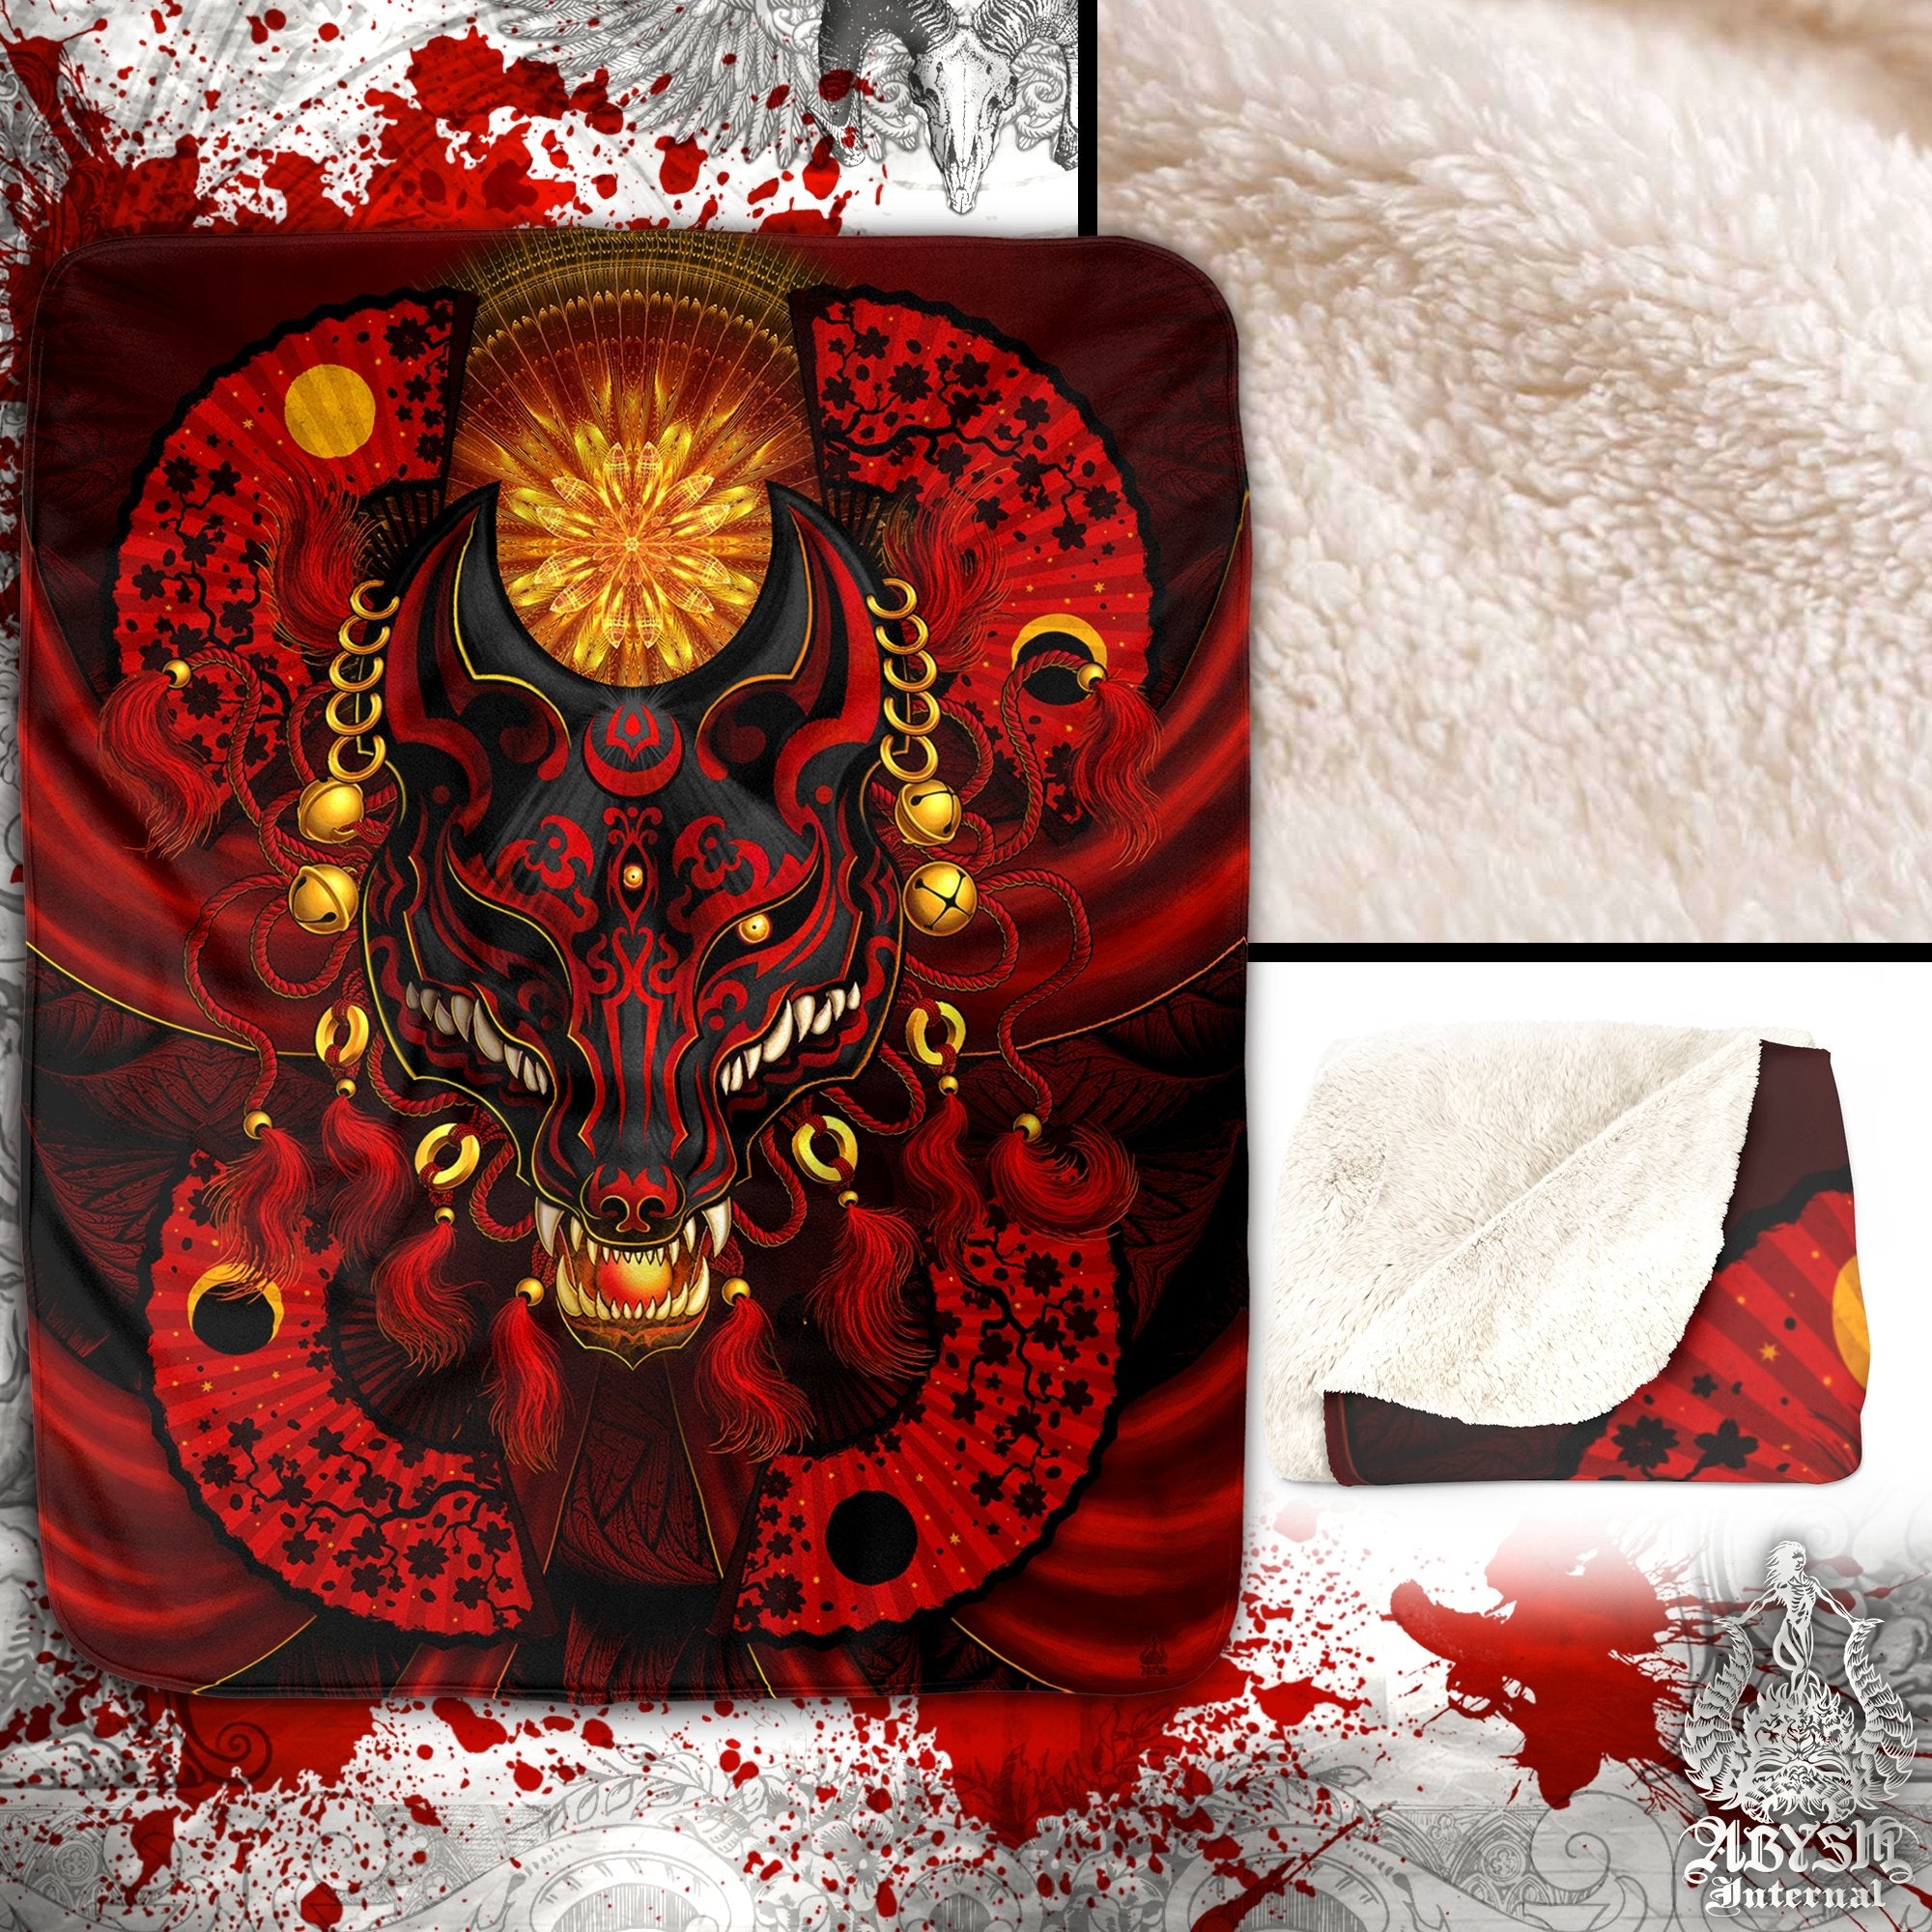 Kitsune Throw Fleece Blanket, Okami, Japanese Fox Mask, Anime and Gamer Decor, Eclectic and Funky Gift - Red & Black - Abysm Internal